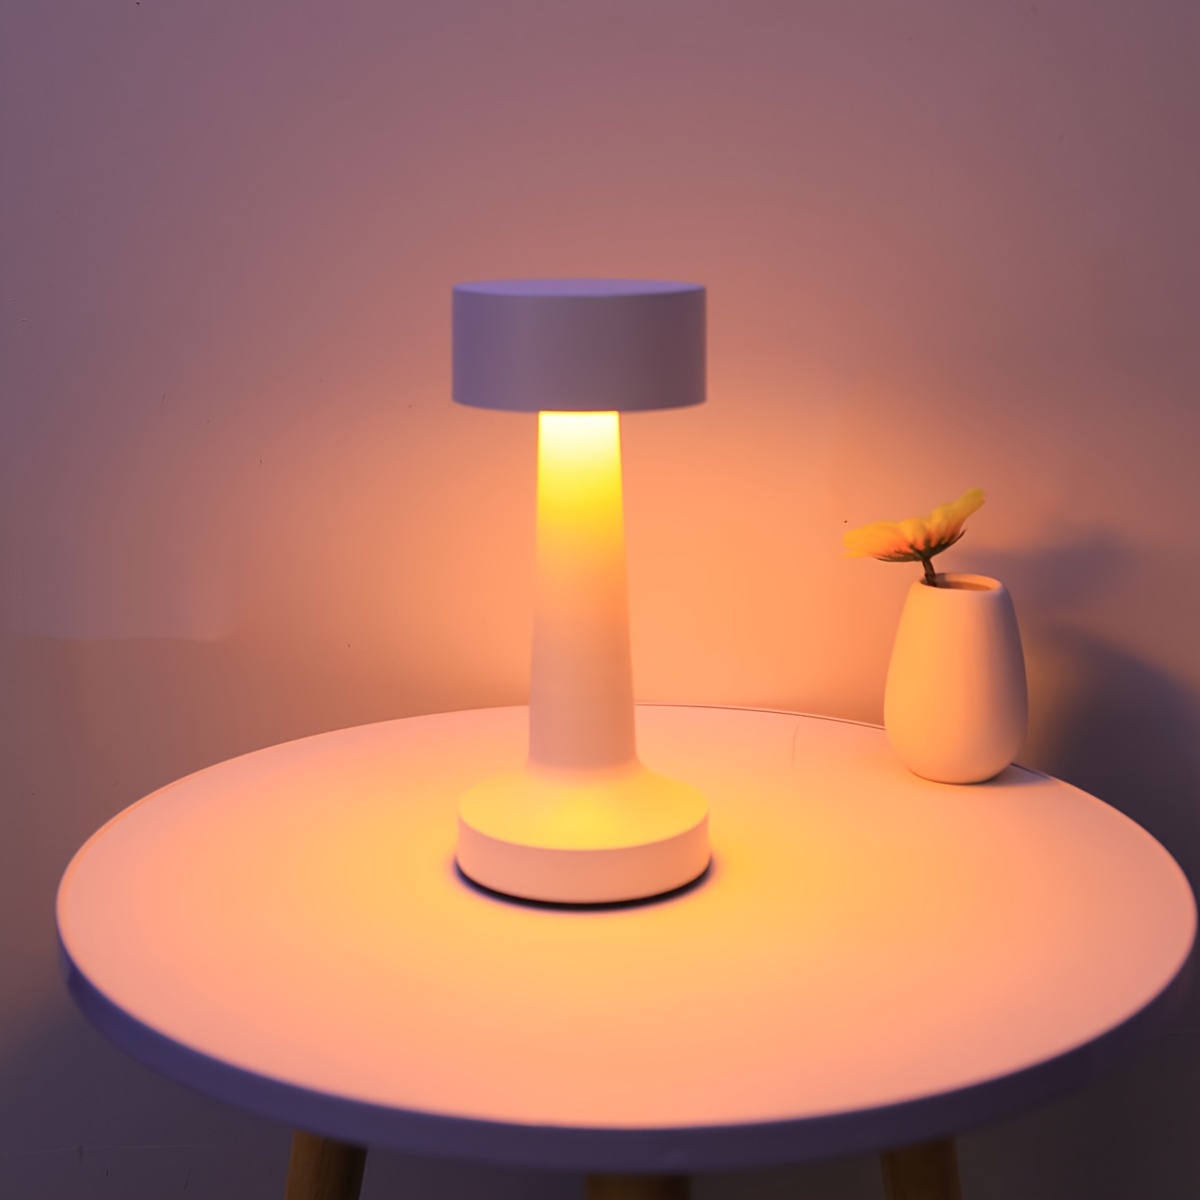 

1pc Modern Simple White Barbell Table Lamp With Charging Touch 3 Color Lighting Suitable For Study, Bedroom, Restaurant, Bar, Night Light With C-shaped Charging Led Table Lamp